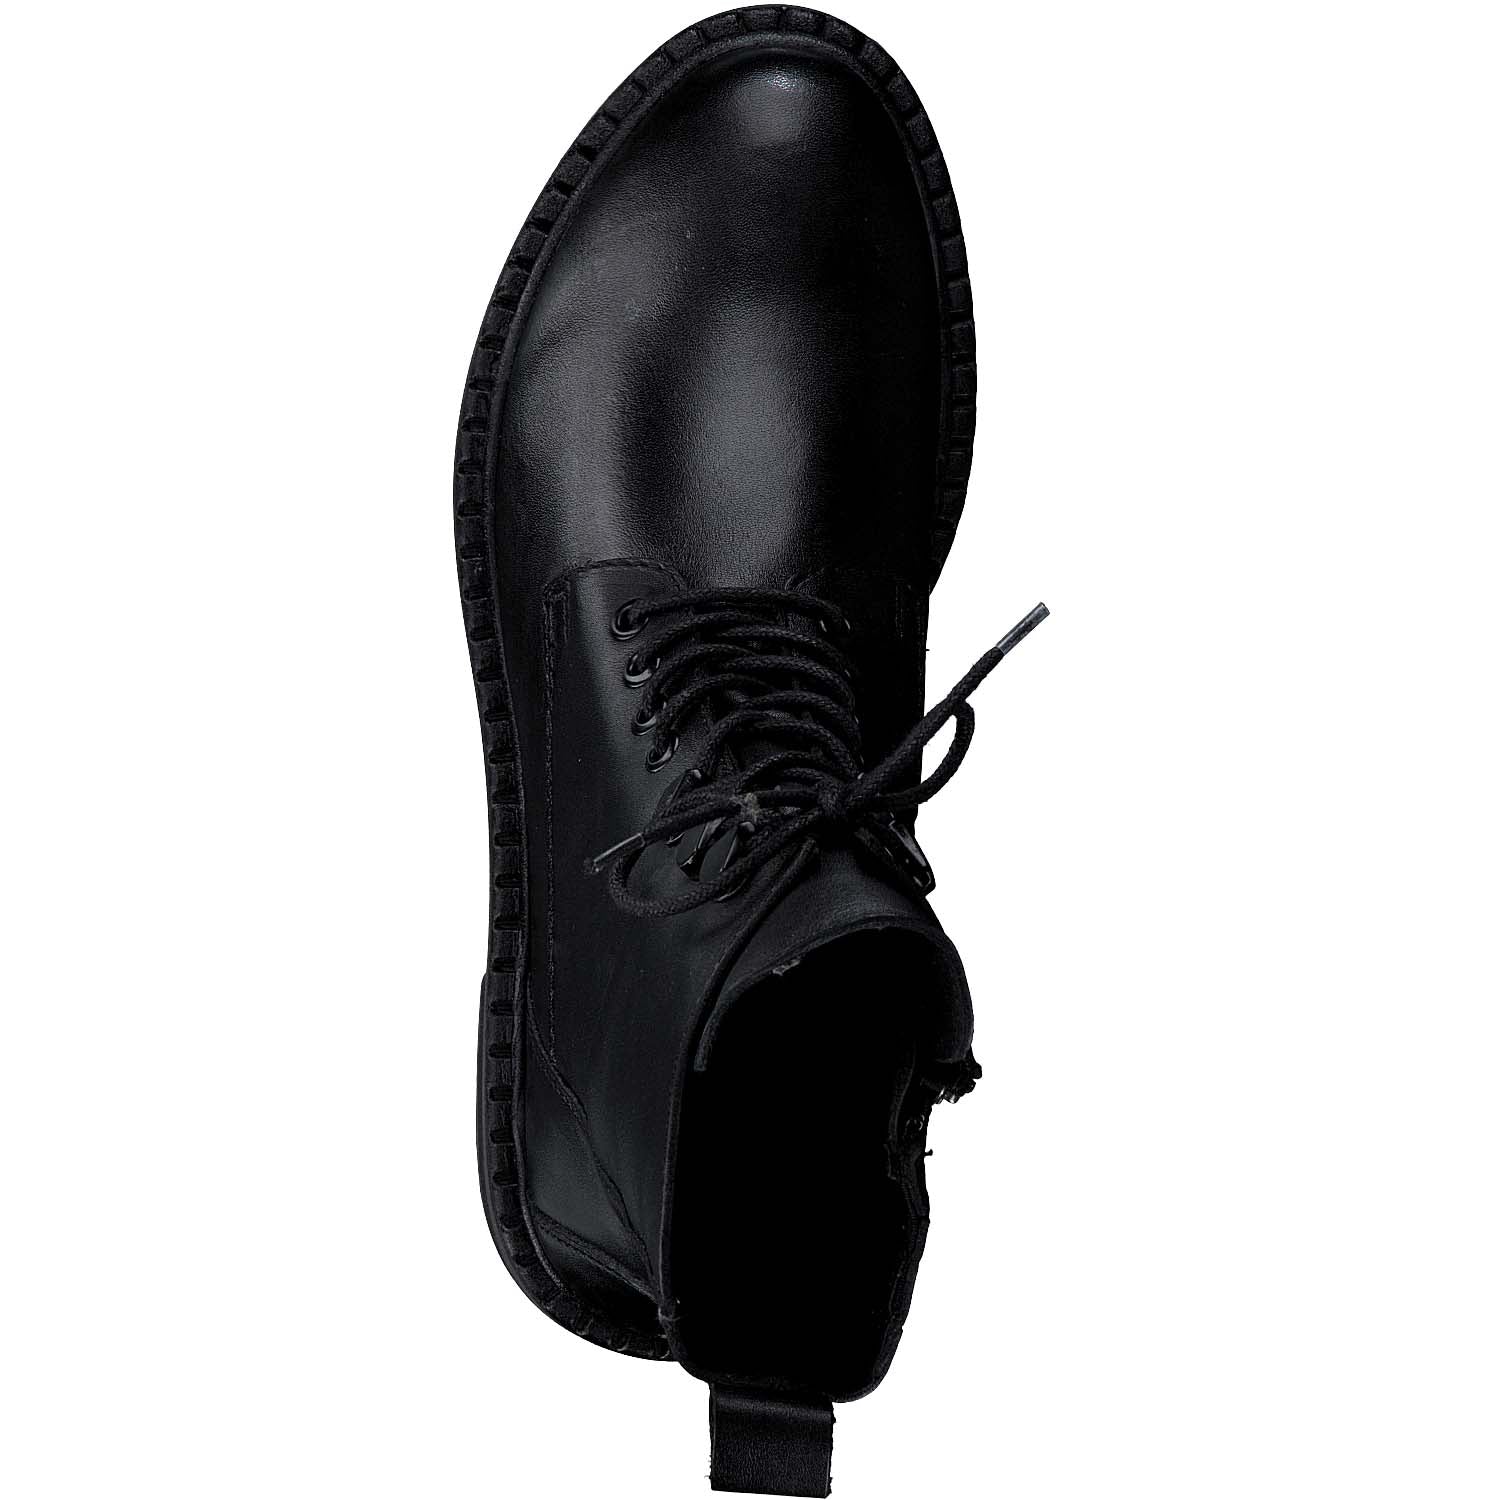 Top view of the Marco Tozzi Combat Boot showcasing its smooth finish.